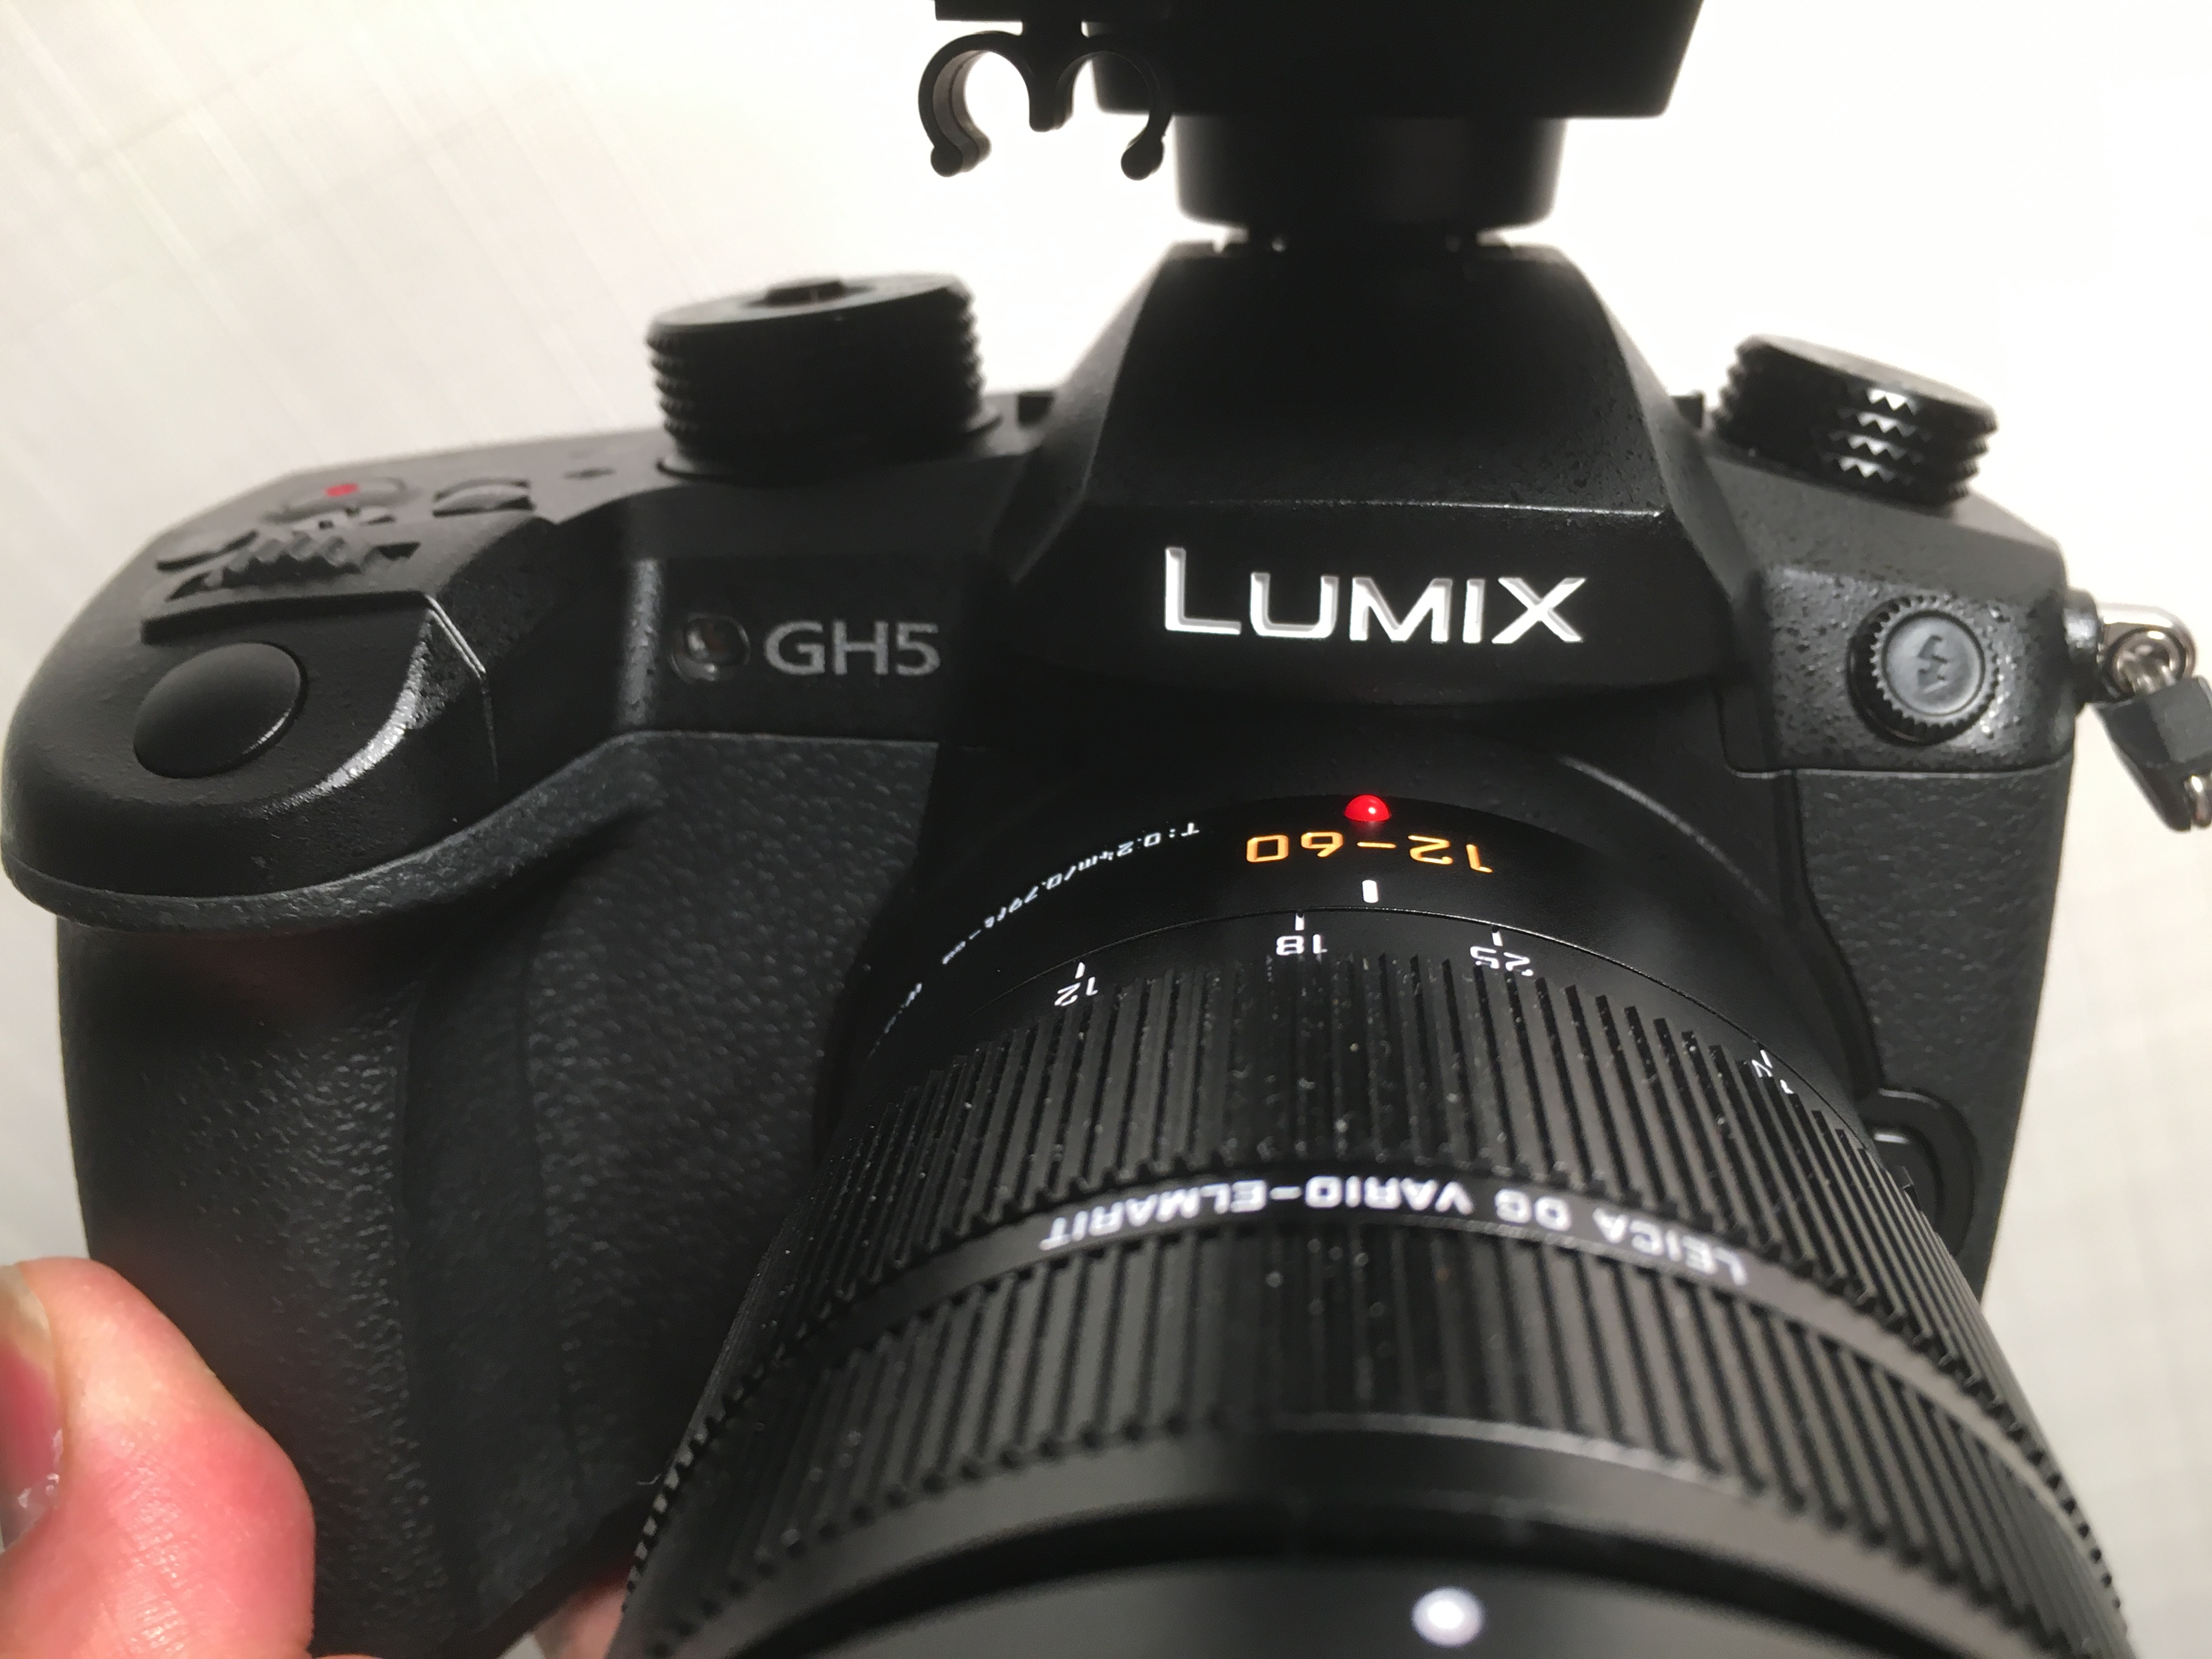 Panasonic GH5 at CES 2017: Internal 10-bit 422 4K recording at Mbps, and up 180fps - Newsshooter